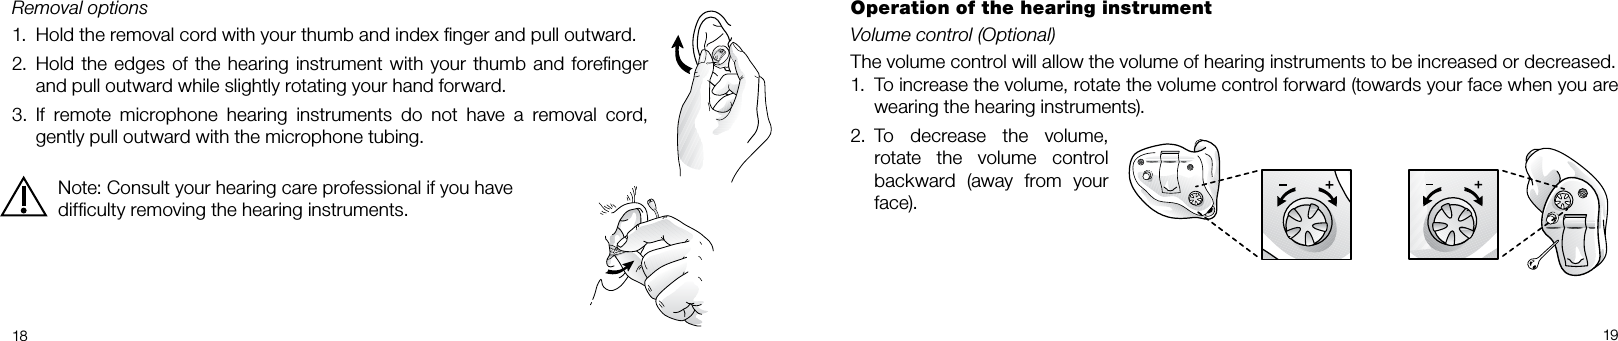  18 19Removal options1.  Hold the removal cord with your thumb and index ﬁnger and pull outward.2.  Hold the edges of the hearing instrument with your thumb and foreﬁnger and pull outward while slightly rotating your hand forward.3.  If  remote  microphone  hearing  instruments  do  not  have  a  removal  cord, gently pull outward with the microphone tubing.Note: Consult your hearing care professional if you have difﬁculty removing the hearing instruments.Operation of the hearing instrumentVolume control (Optional)The volume control will allow the volume of hearing instruments to be increased or decreased. 1.  To increase the volume, rotate the volume control forward (towards your face when you are wearing the hearing instruments).2.   To  decrease  the  volume, rotate  the  volume  control backward  (away  from  your face).